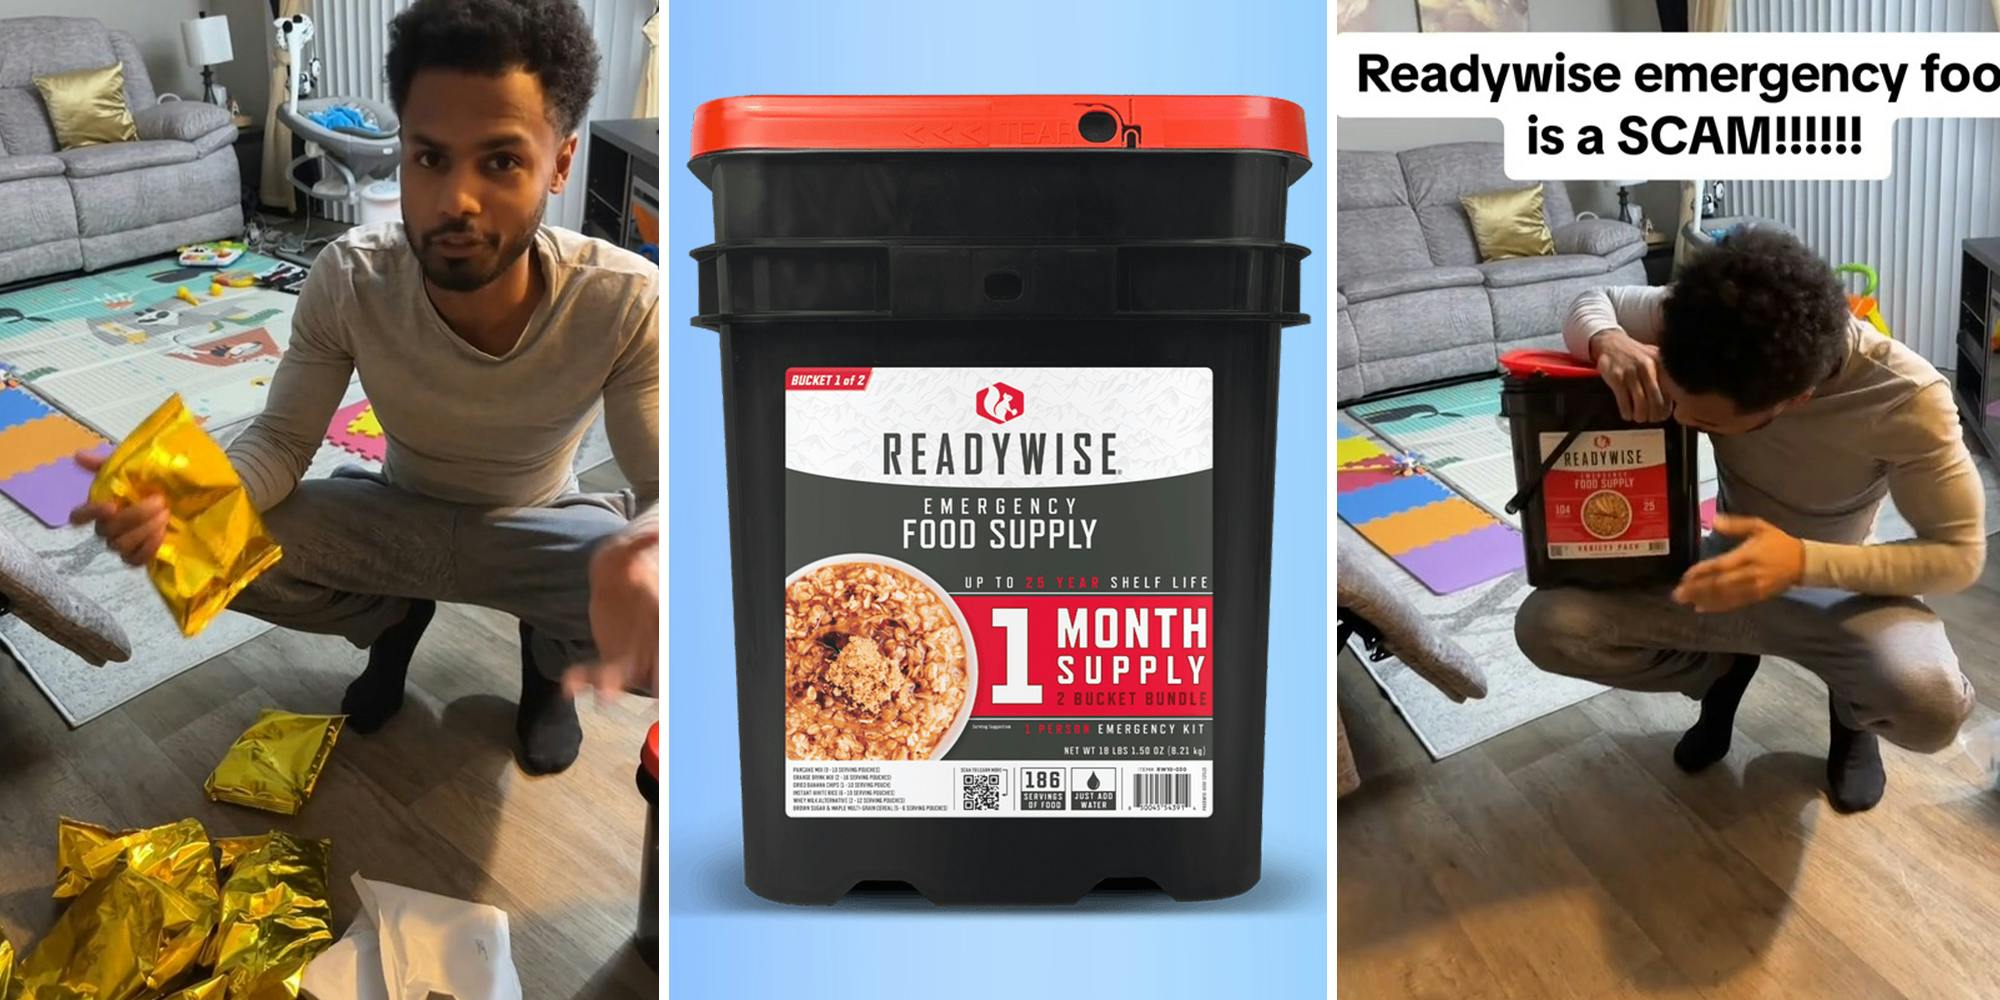 ‘I got that for 60 bucks at Costco’: Man reveals how Readywise $150 emergency food packs are a ‘scam’